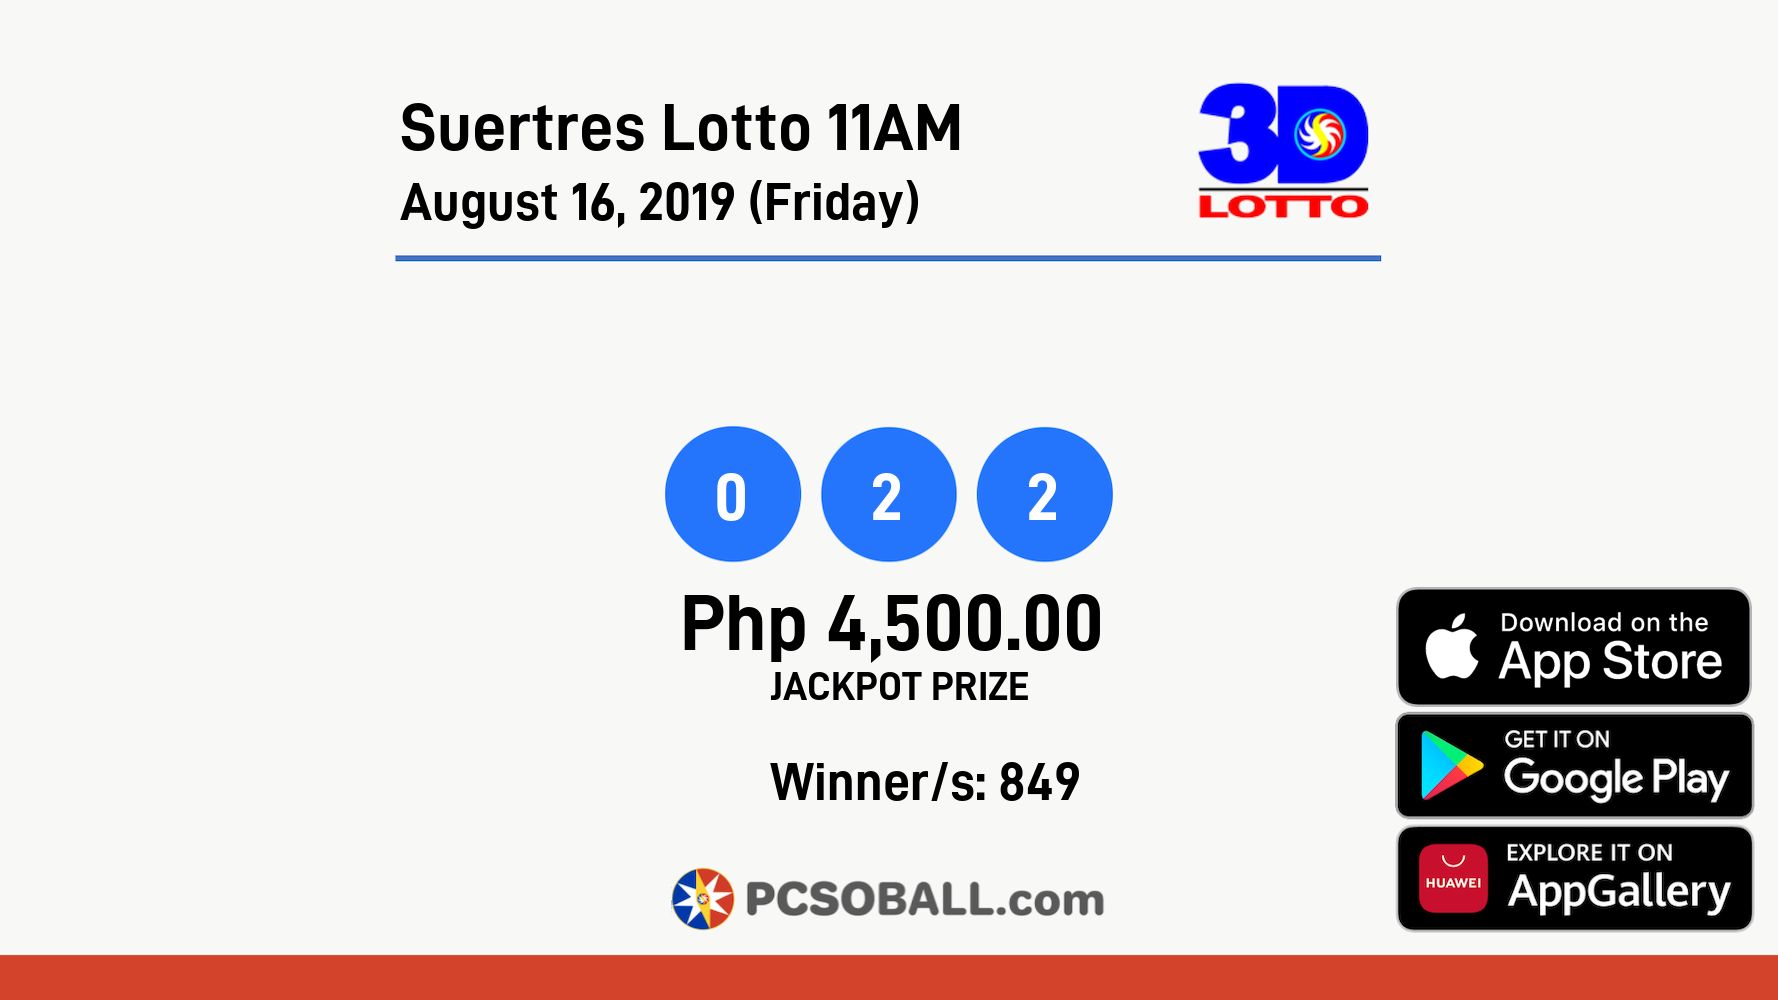 Suertres Lotto 11AM August 16, 2019 (Friday) Result